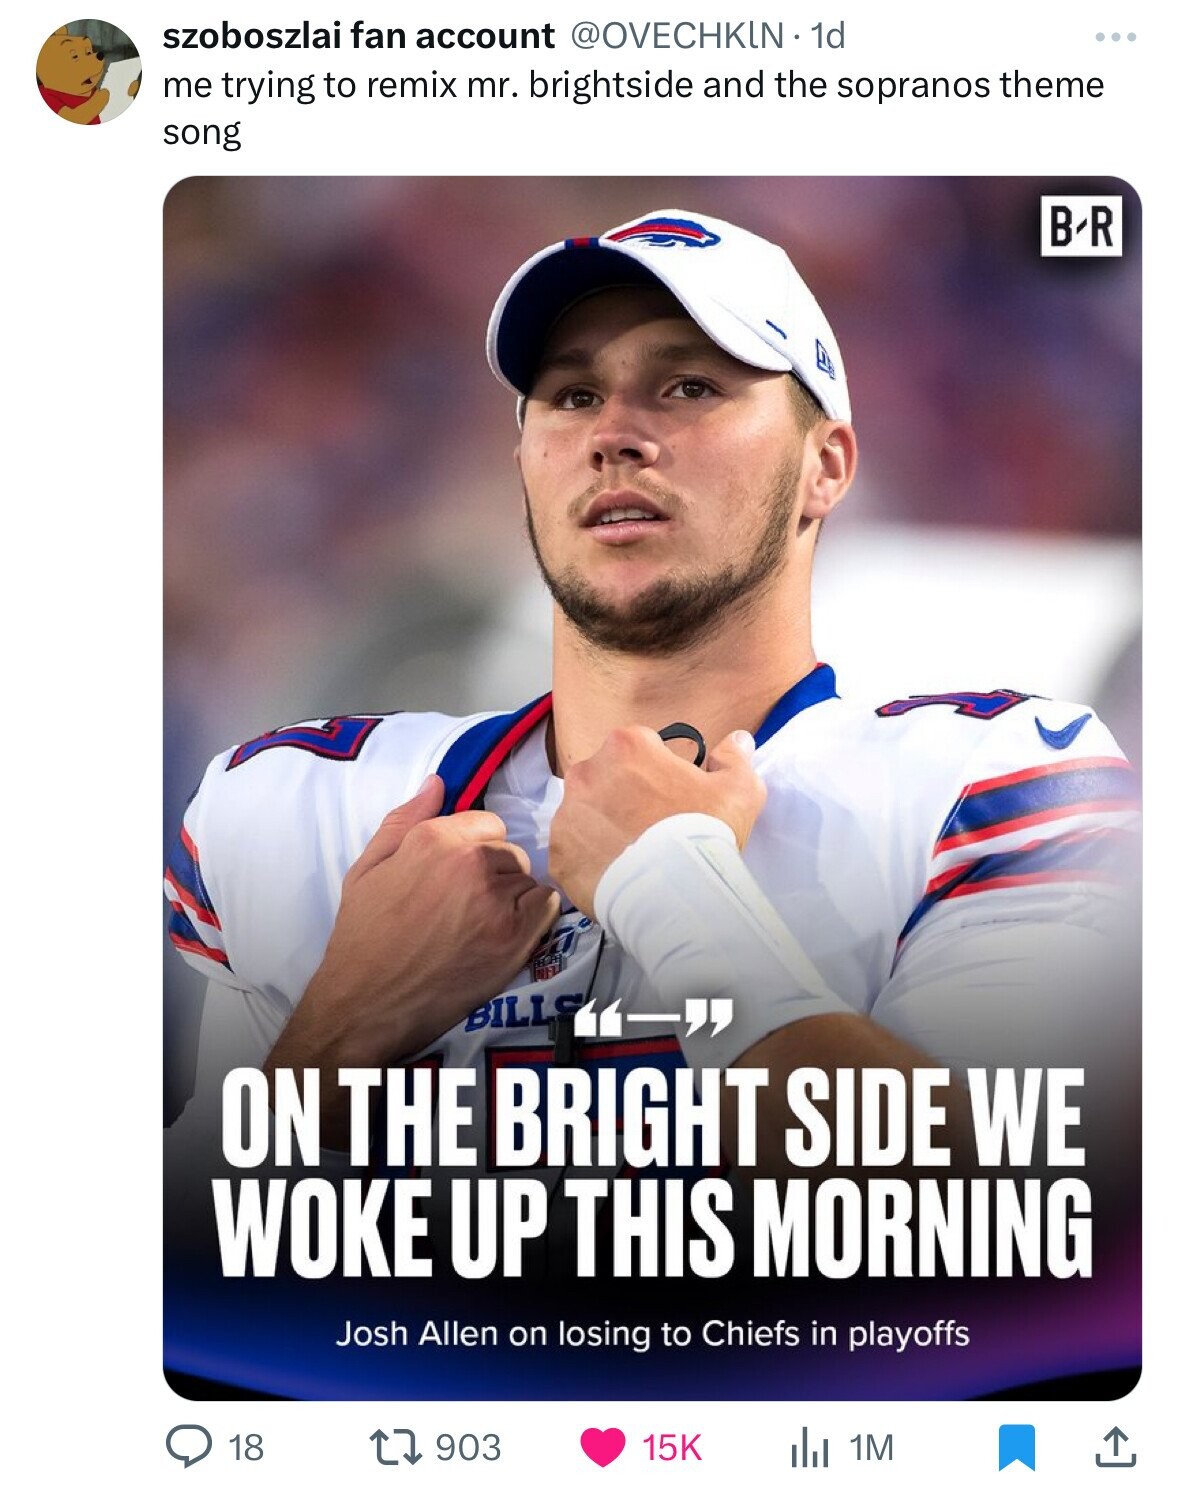 photo caption - szoboszlai fan account . 1d me trying to remix mr. brightside and the sopranos theme song Bills 18 ... On The Bright Side We Woke Up This Morning Josh Allen on losing to Chiefs in playoffs 1903 Br 15K 1M